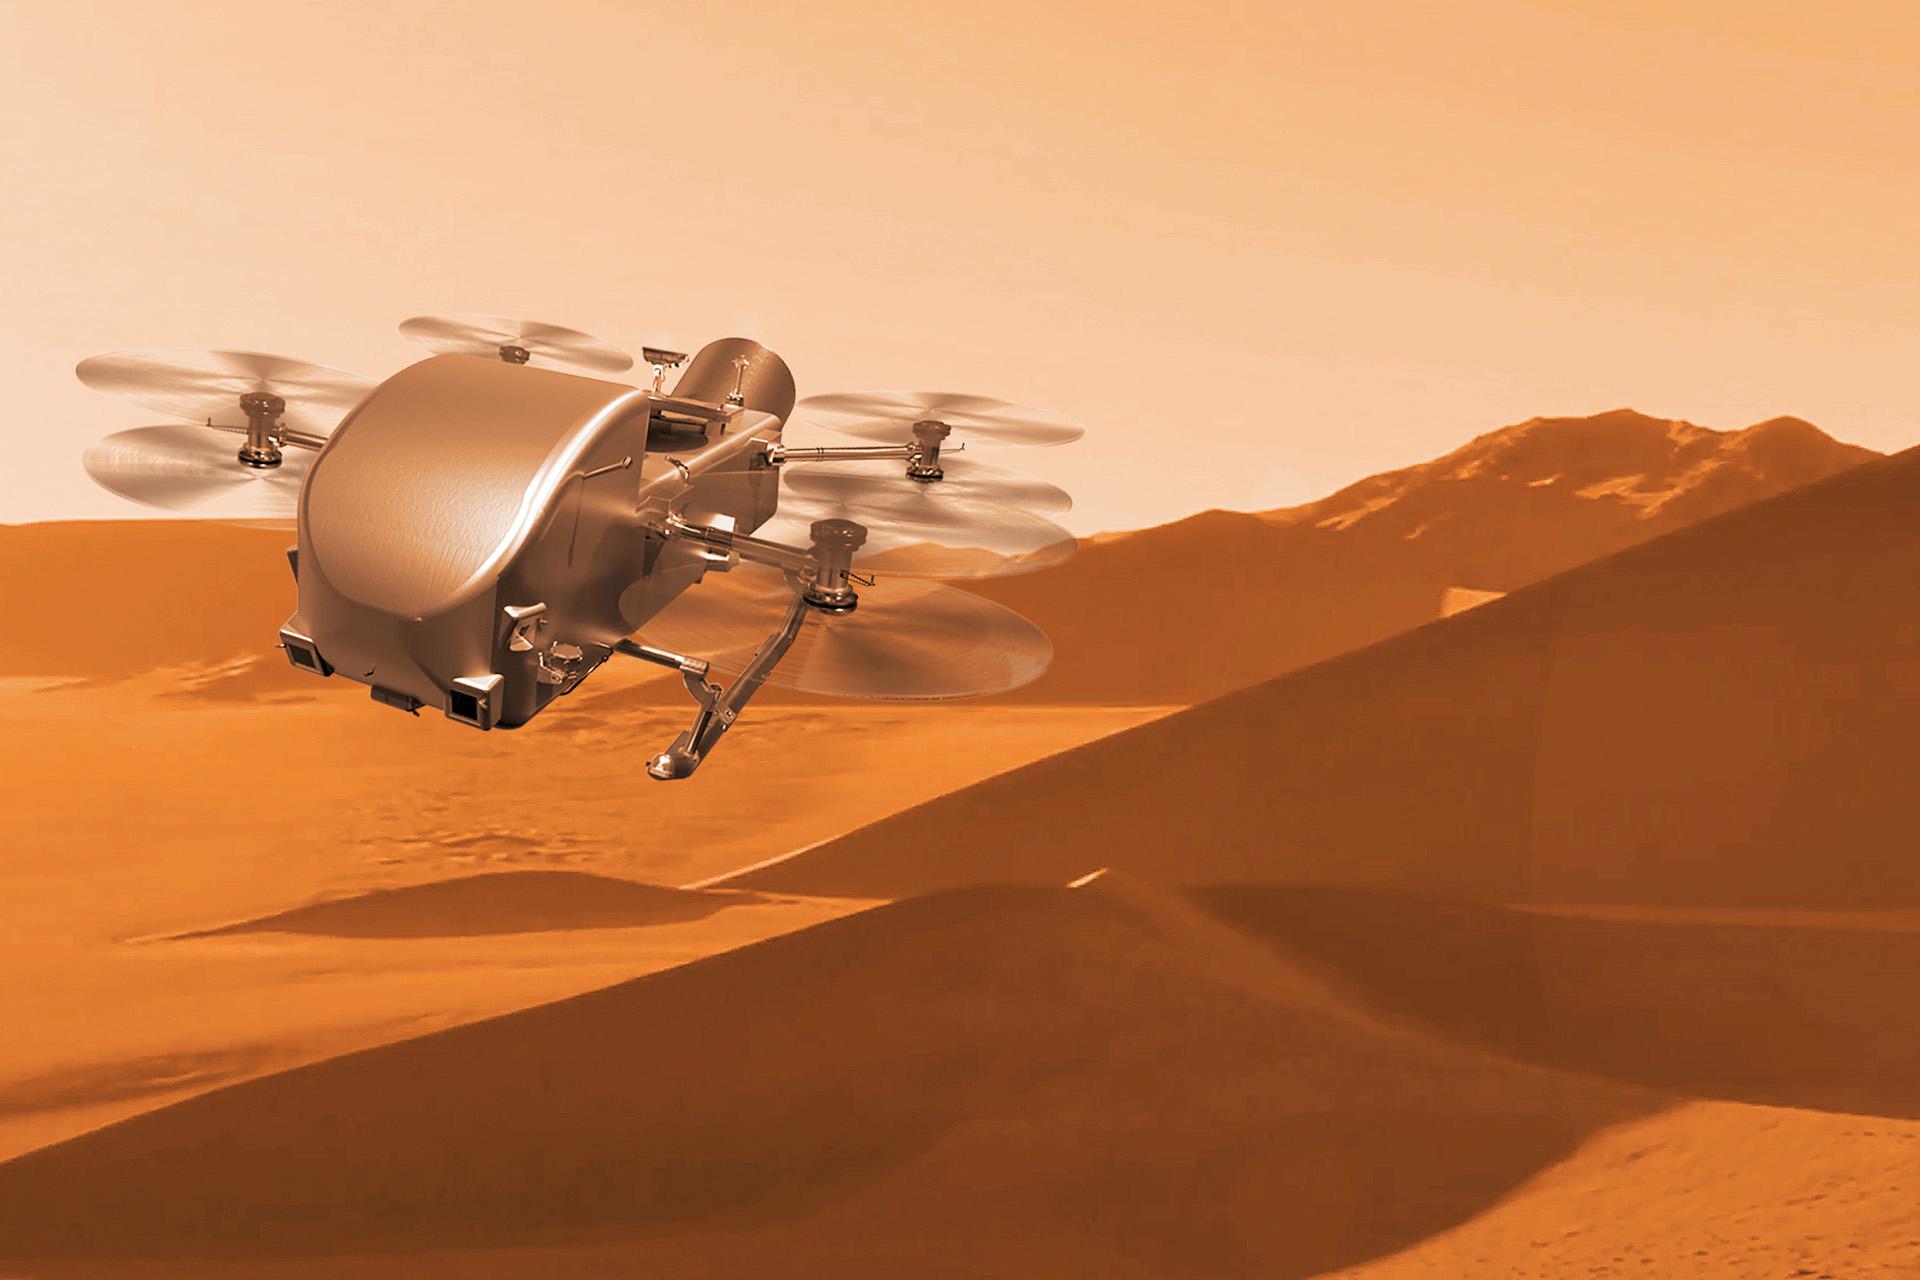 A silver drone-like rotocraft flies over a desert of tan-colored dunes and a hazy, orange sky